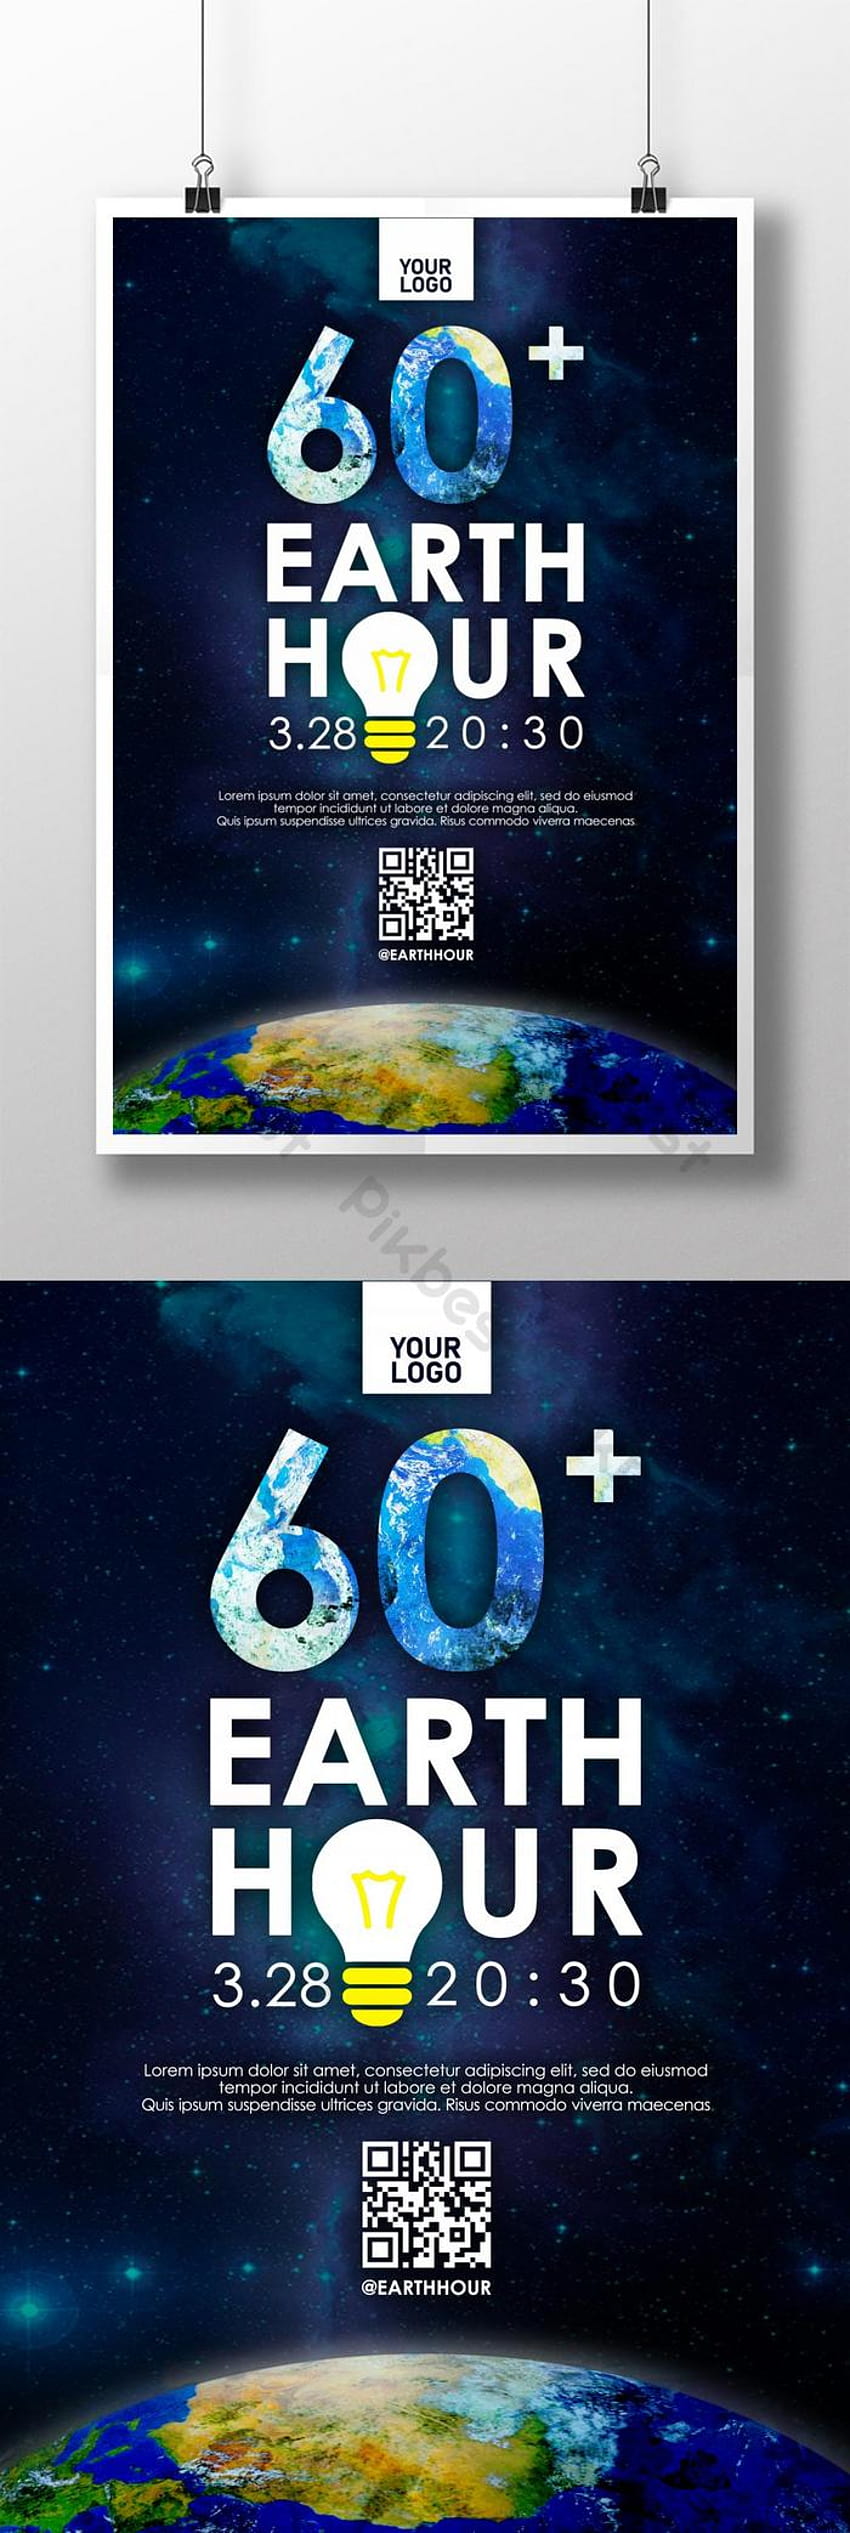 2020 EARTH HOUR poster HD phone wallpaper